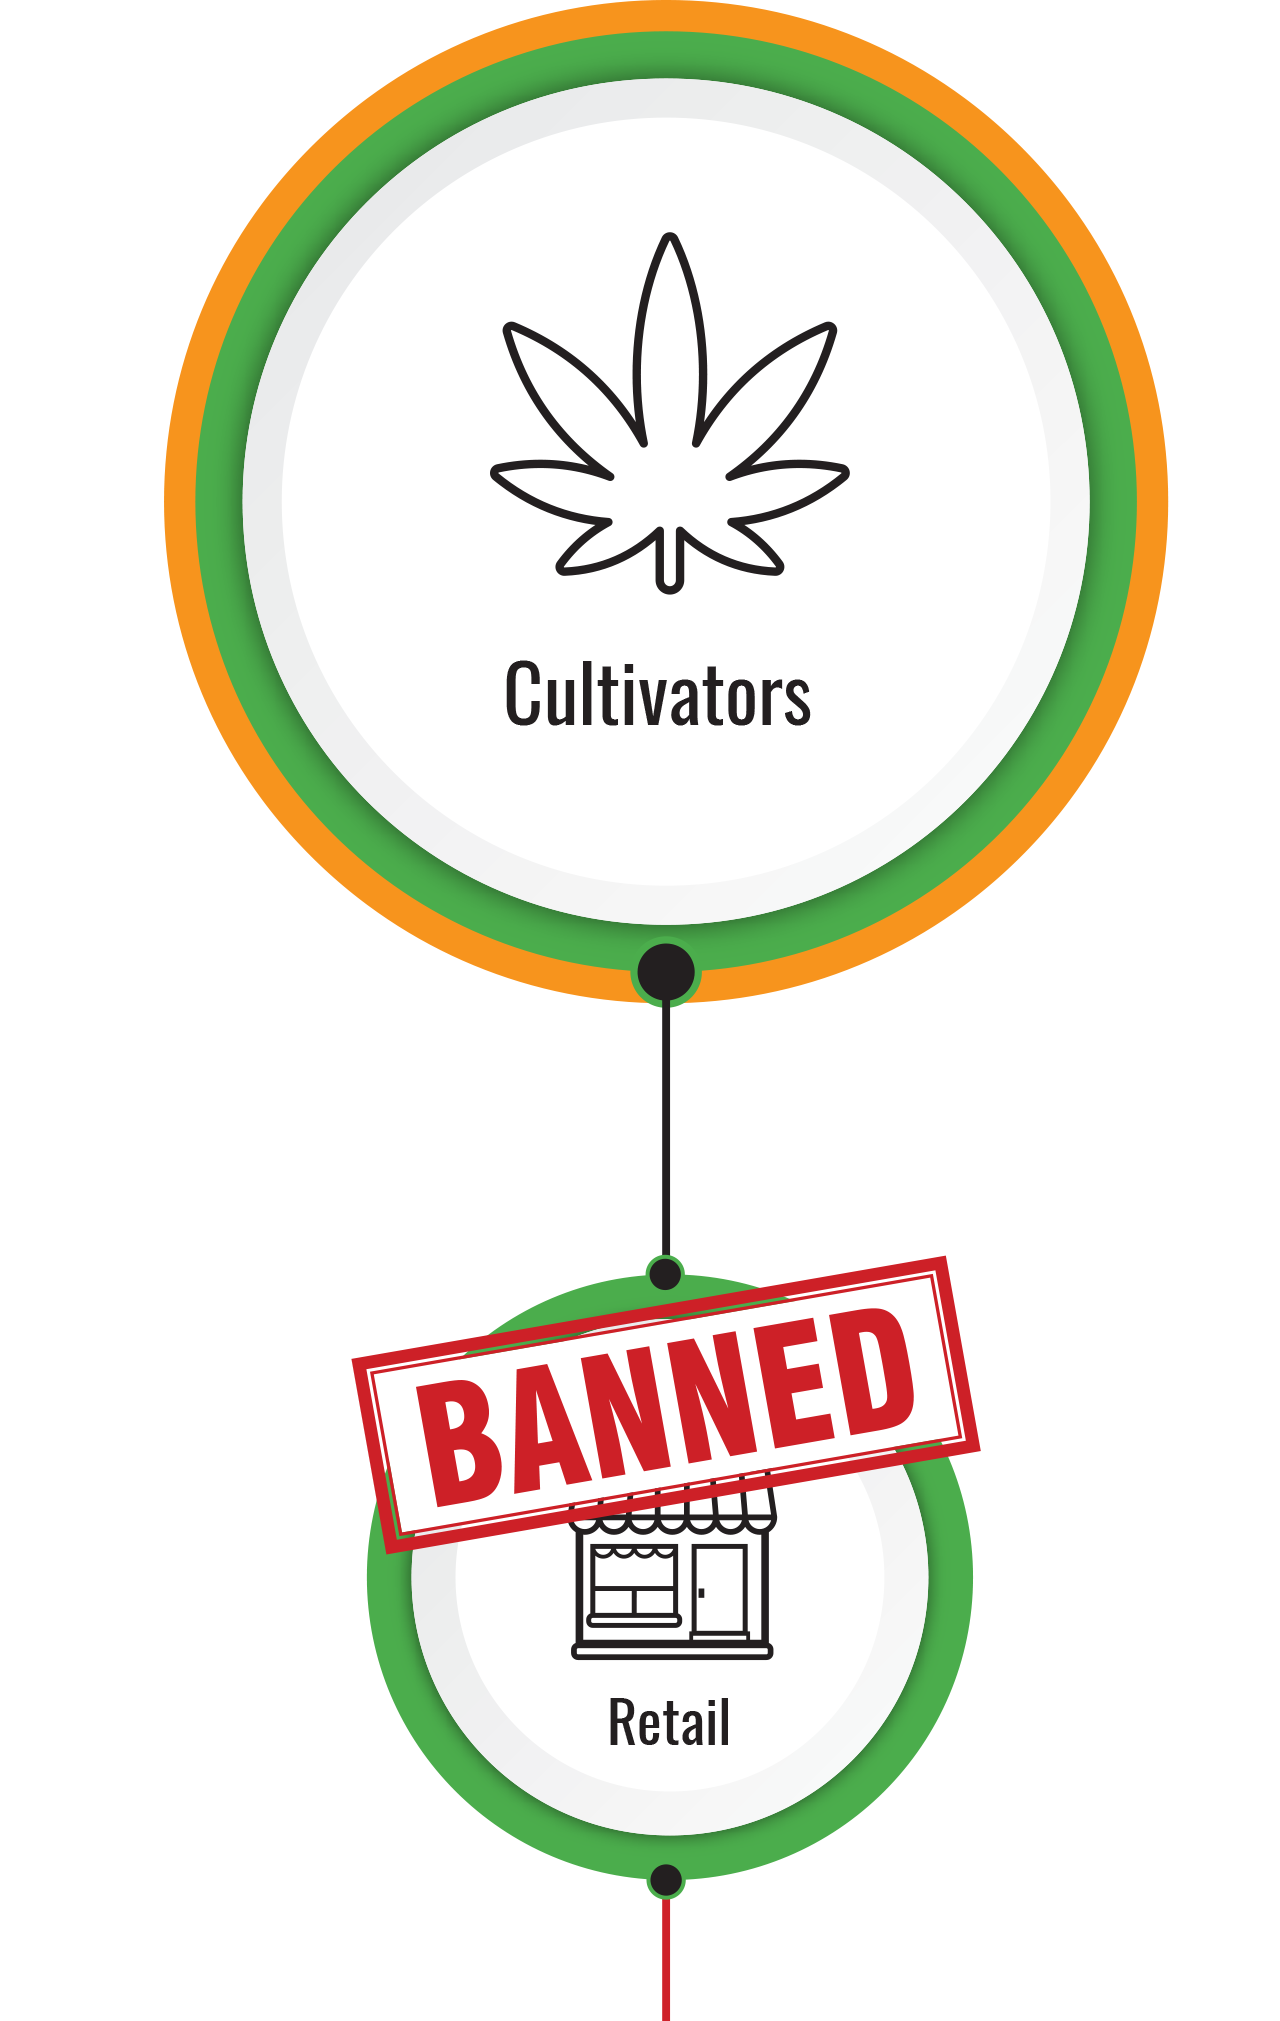 cultivators to retailers banned